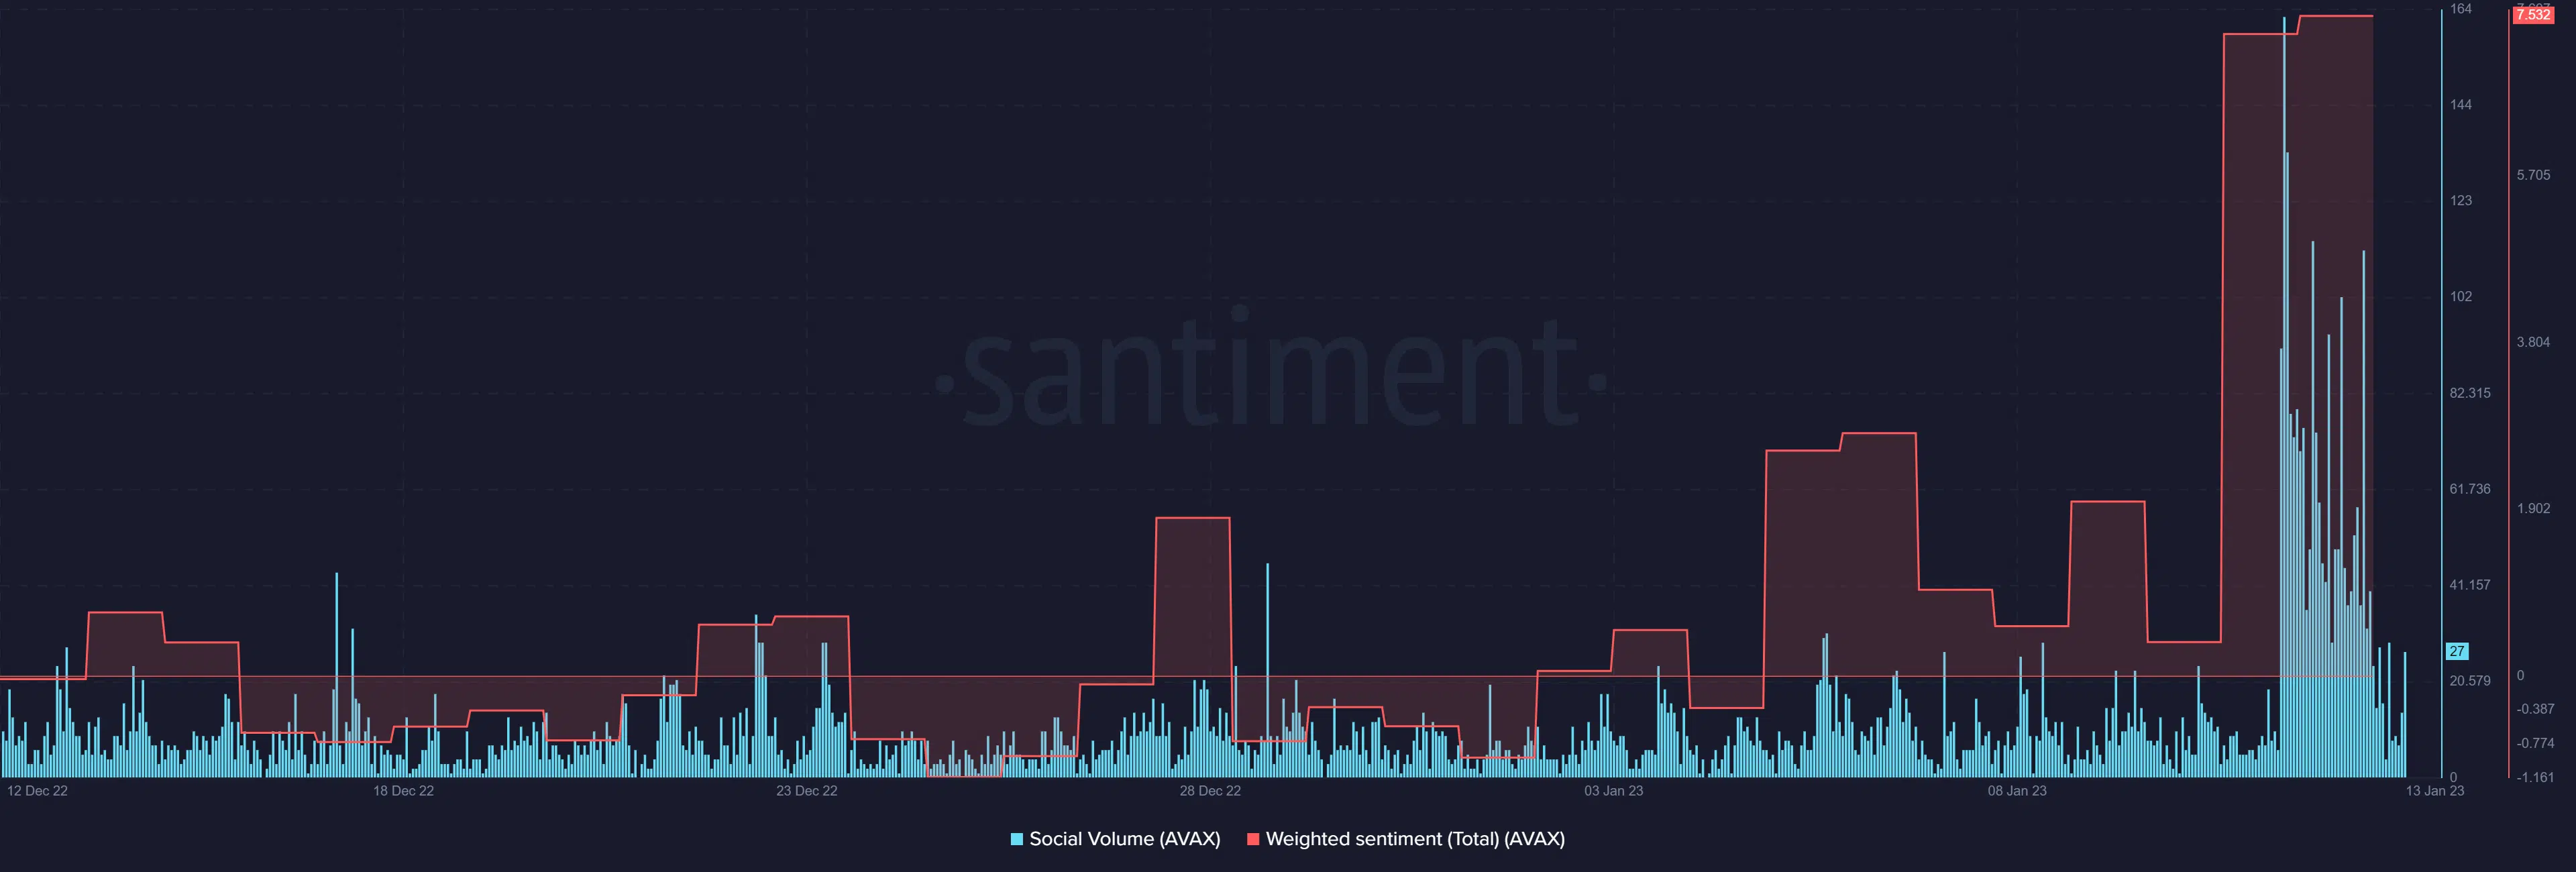 Avalanche weighted sentiment and social volume